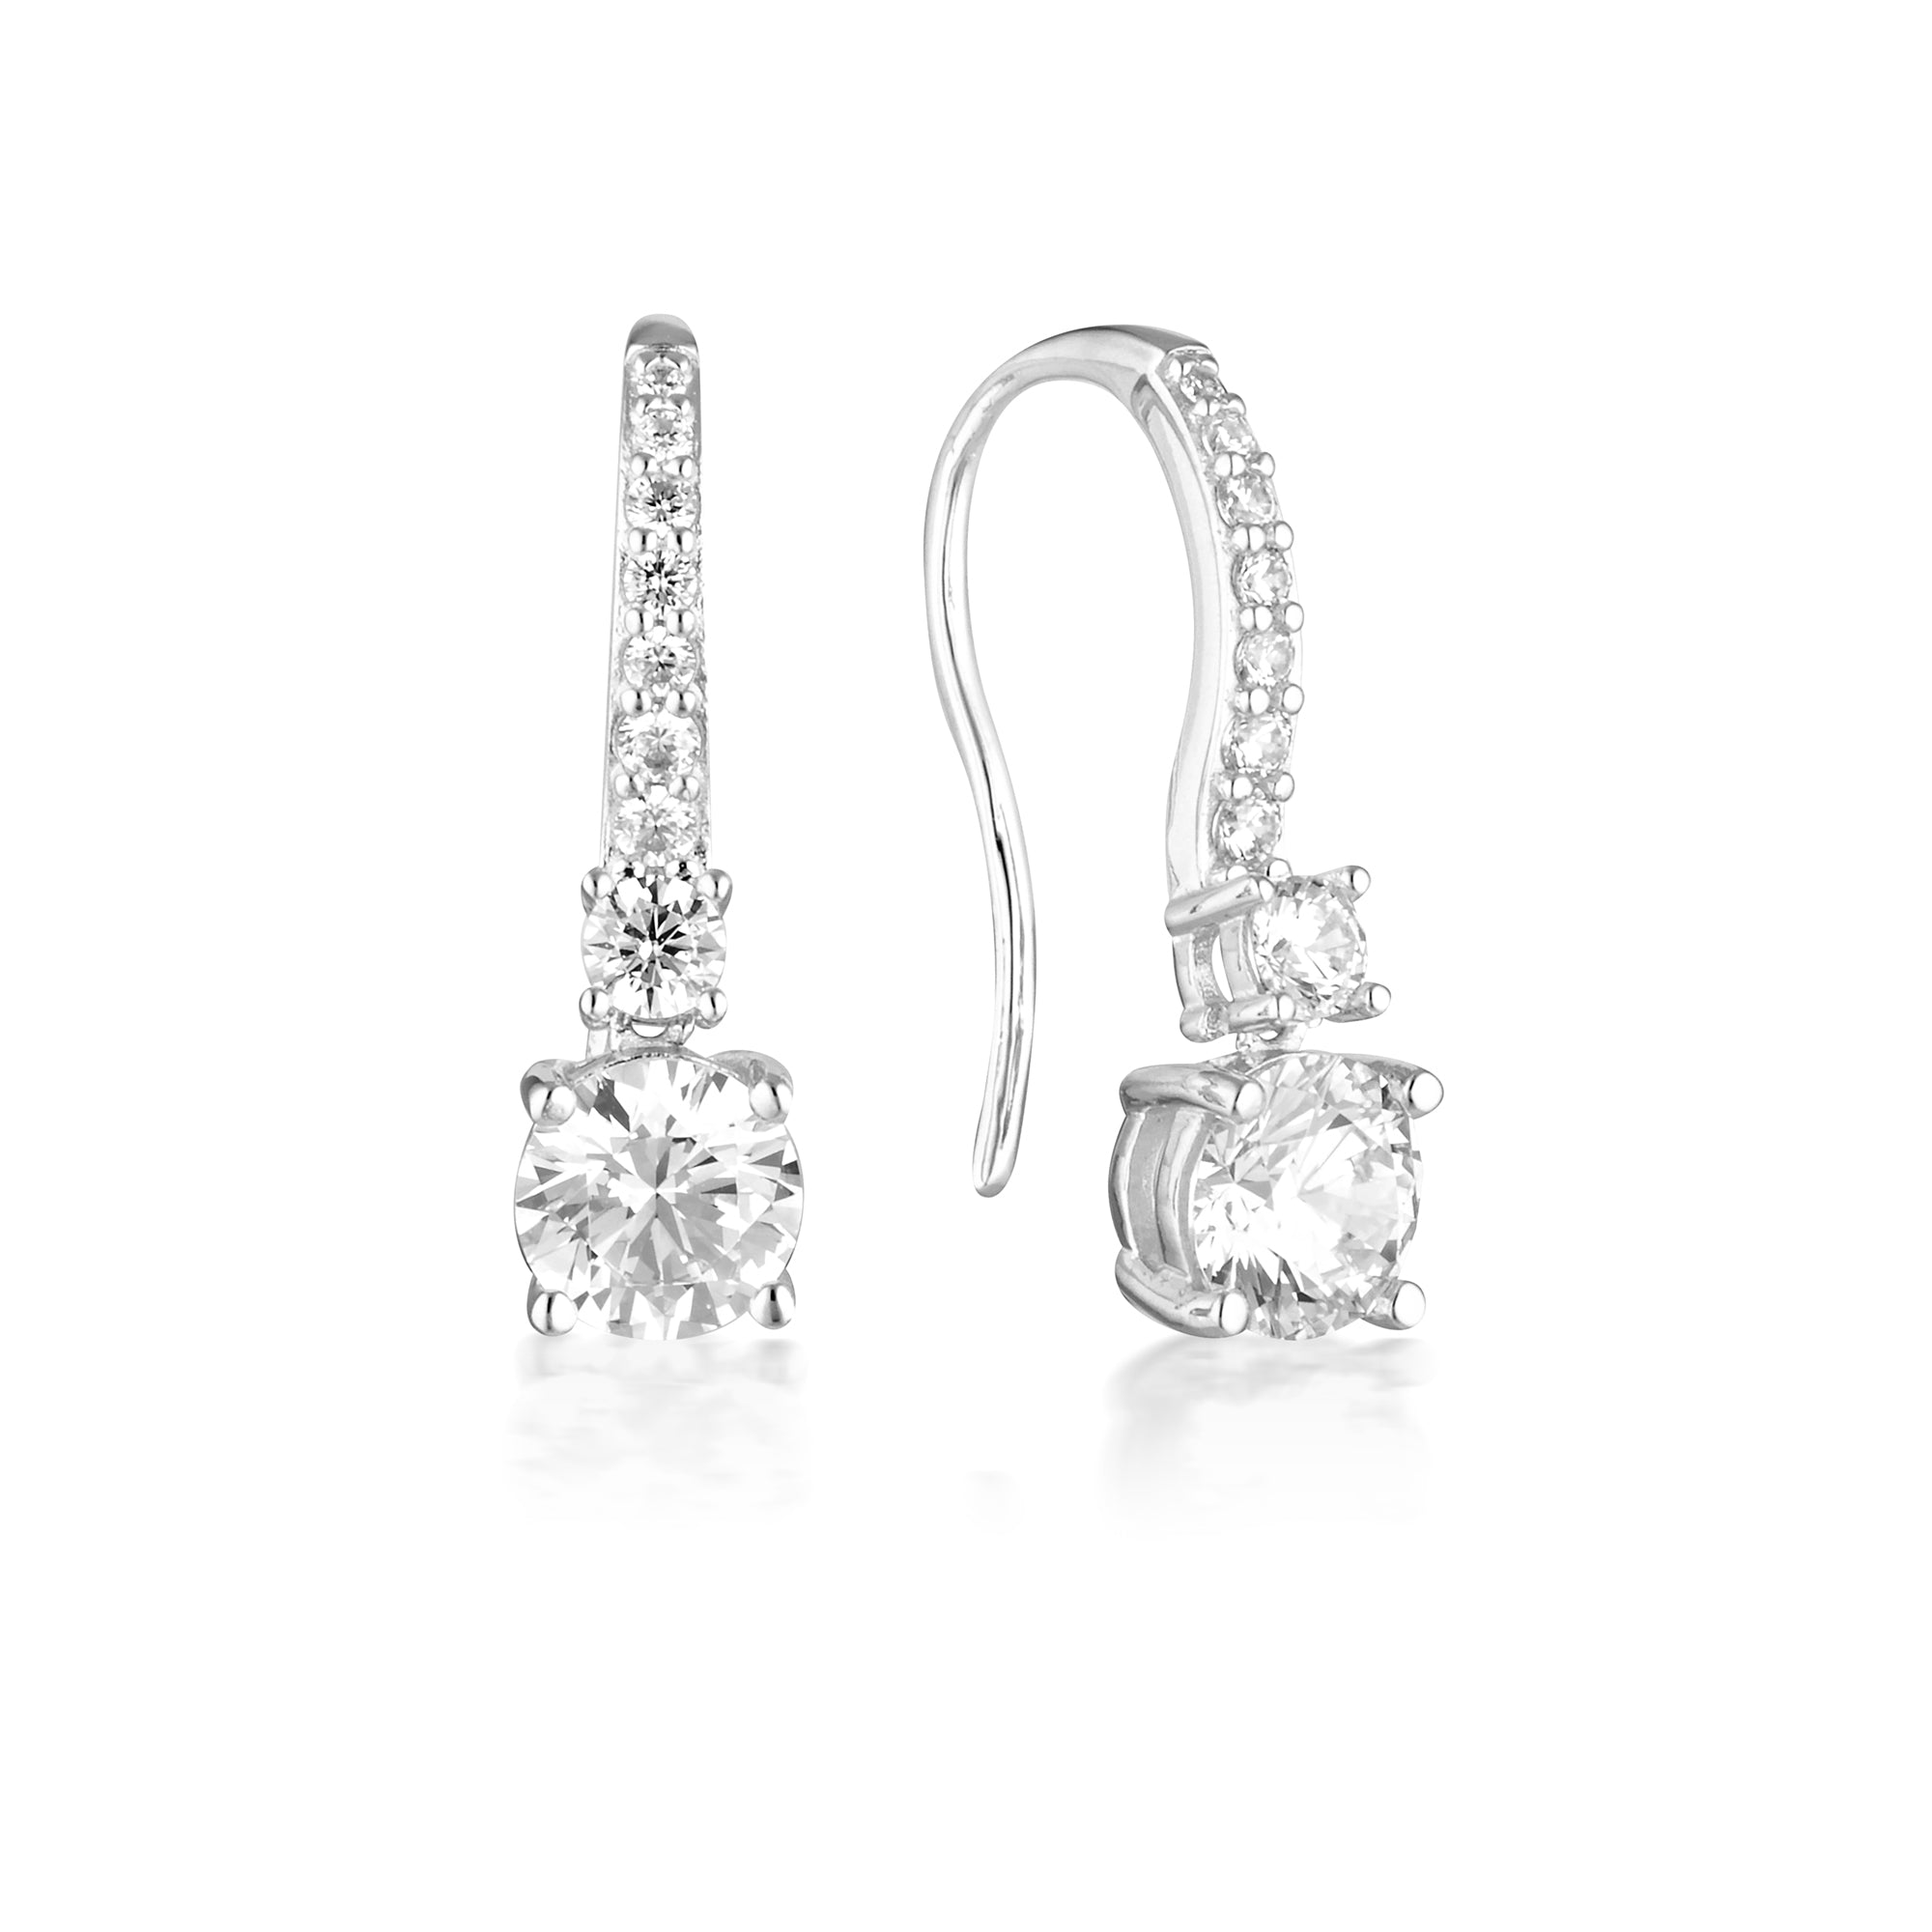 ICONIC BRIDAL DAPHNE EARRINGS SILVER